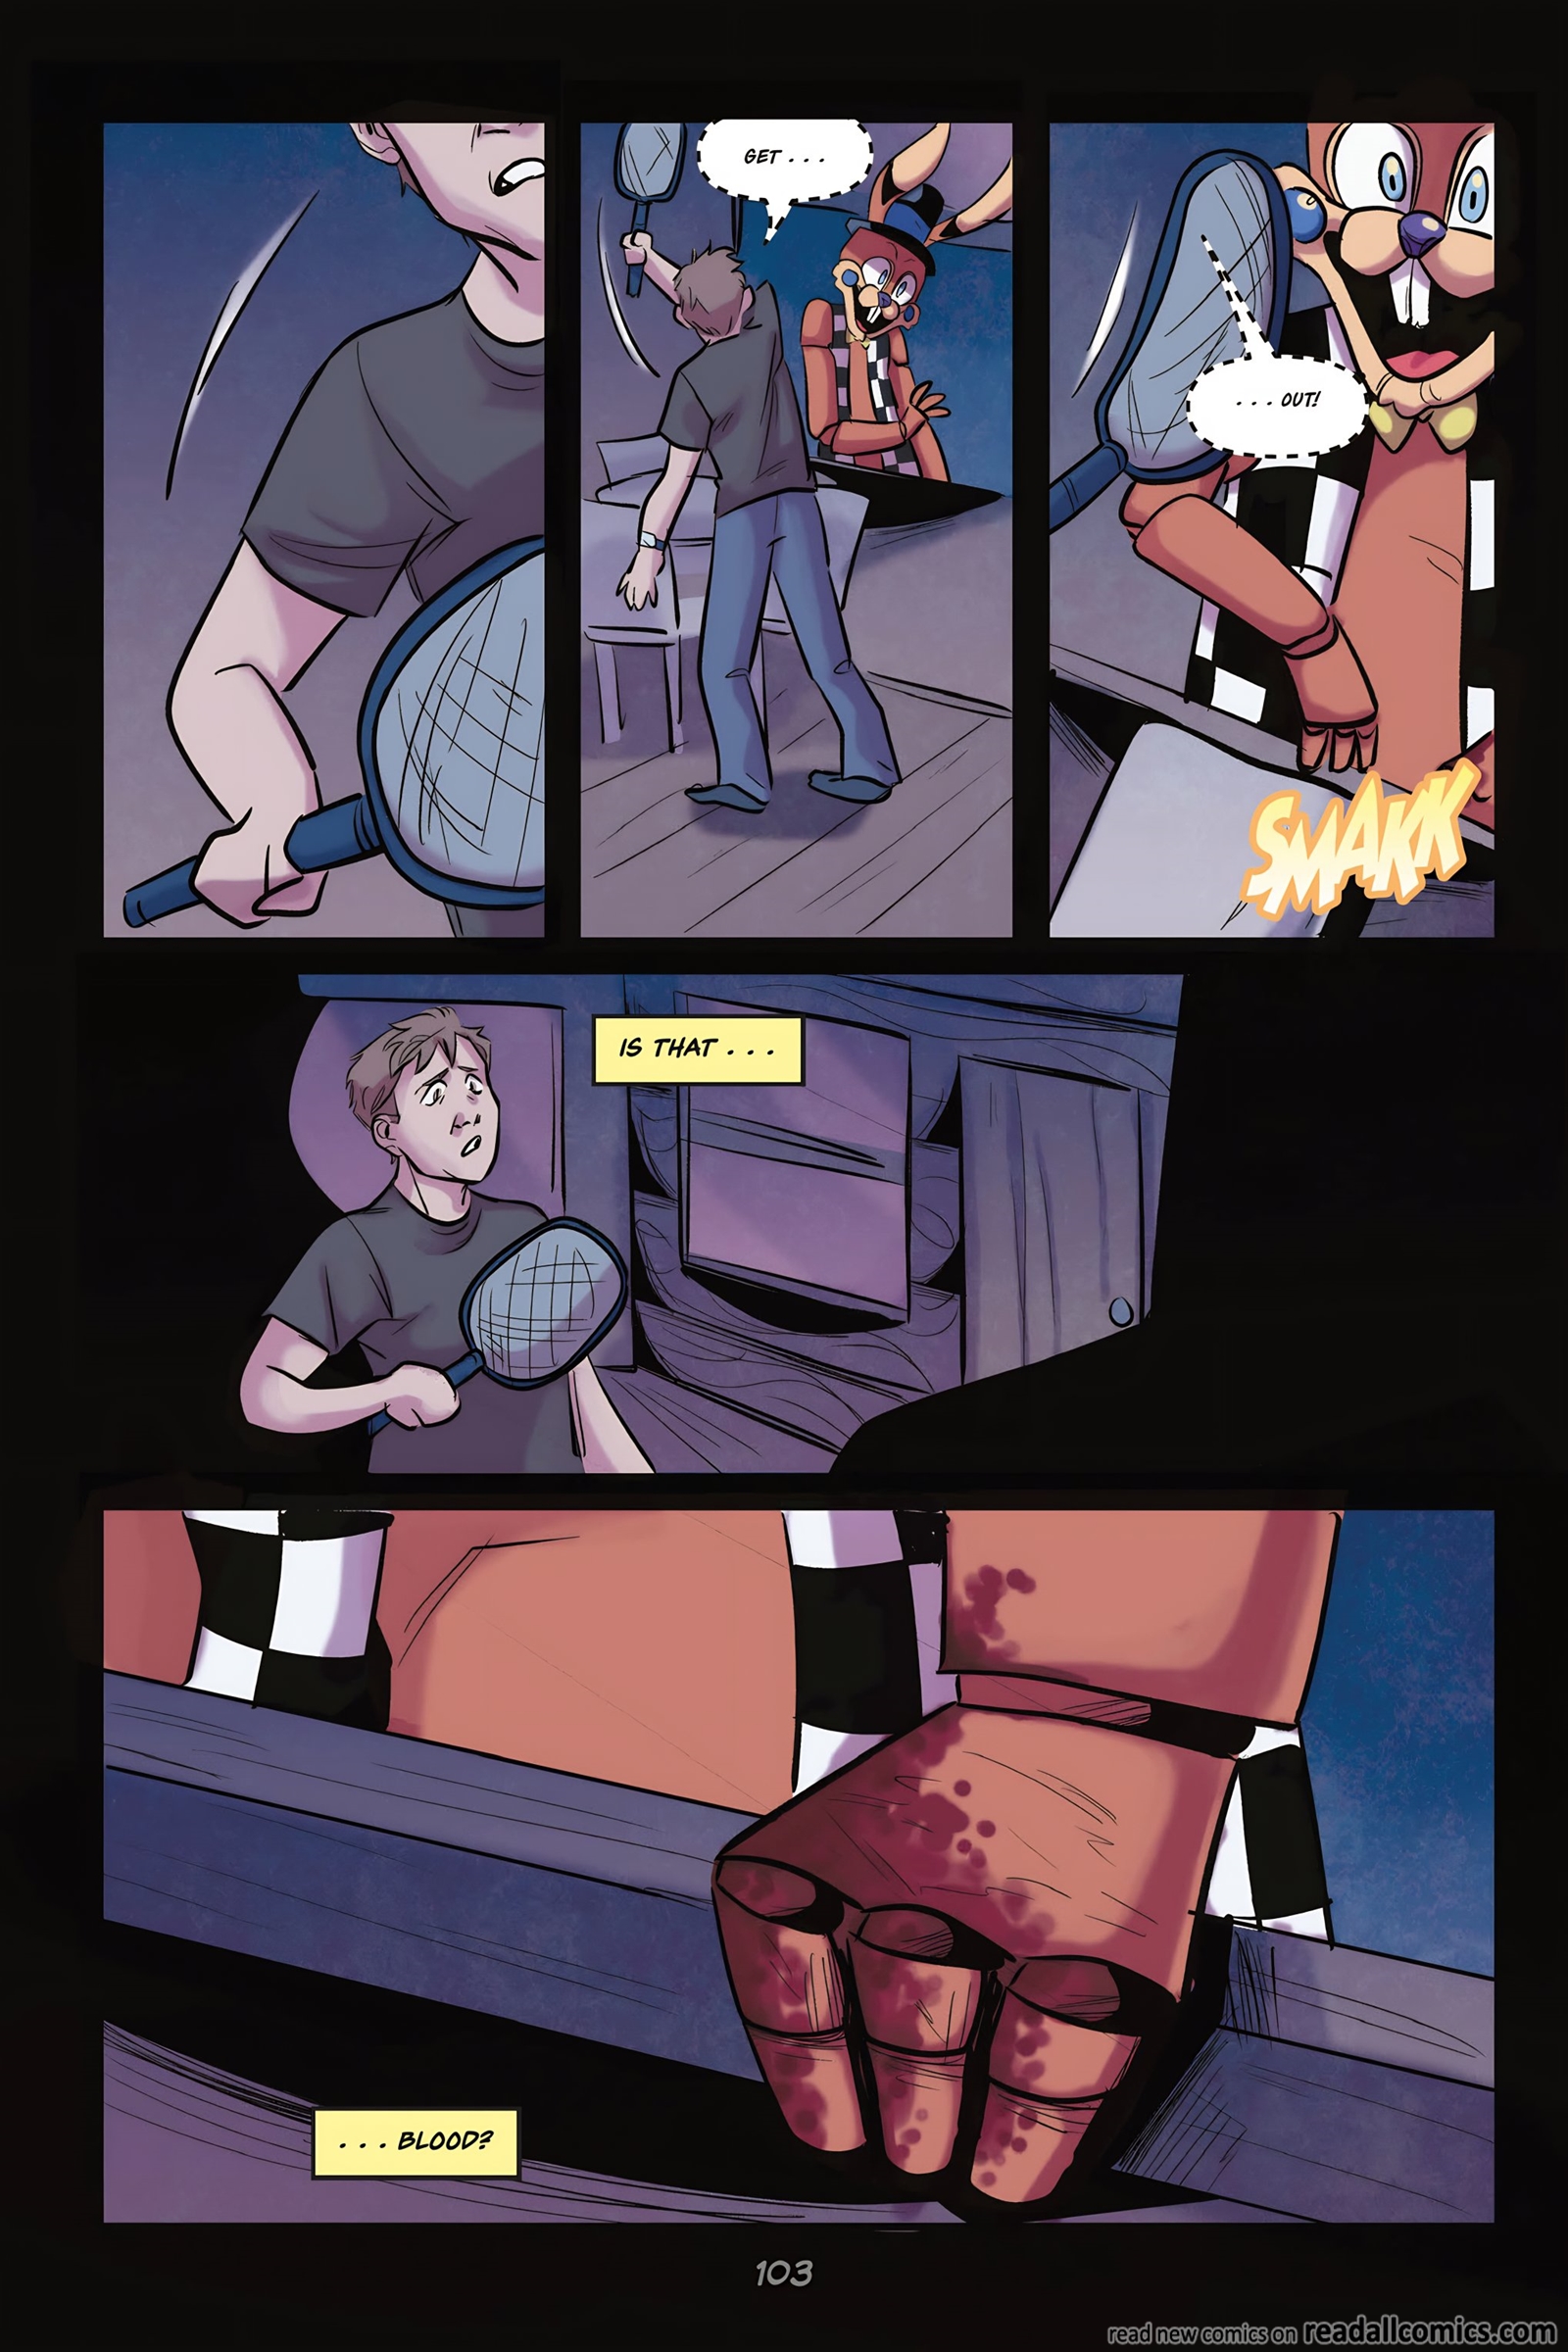 Five Nights at Freddy's: Fazbear Frights Graphic Novel Collection #TPB 2  (Part 2) - Read Five Nights at Freddy's: Fazbear Frights Graphic Novel  Collection Issue #TPB 2 (Part 2) Page 19